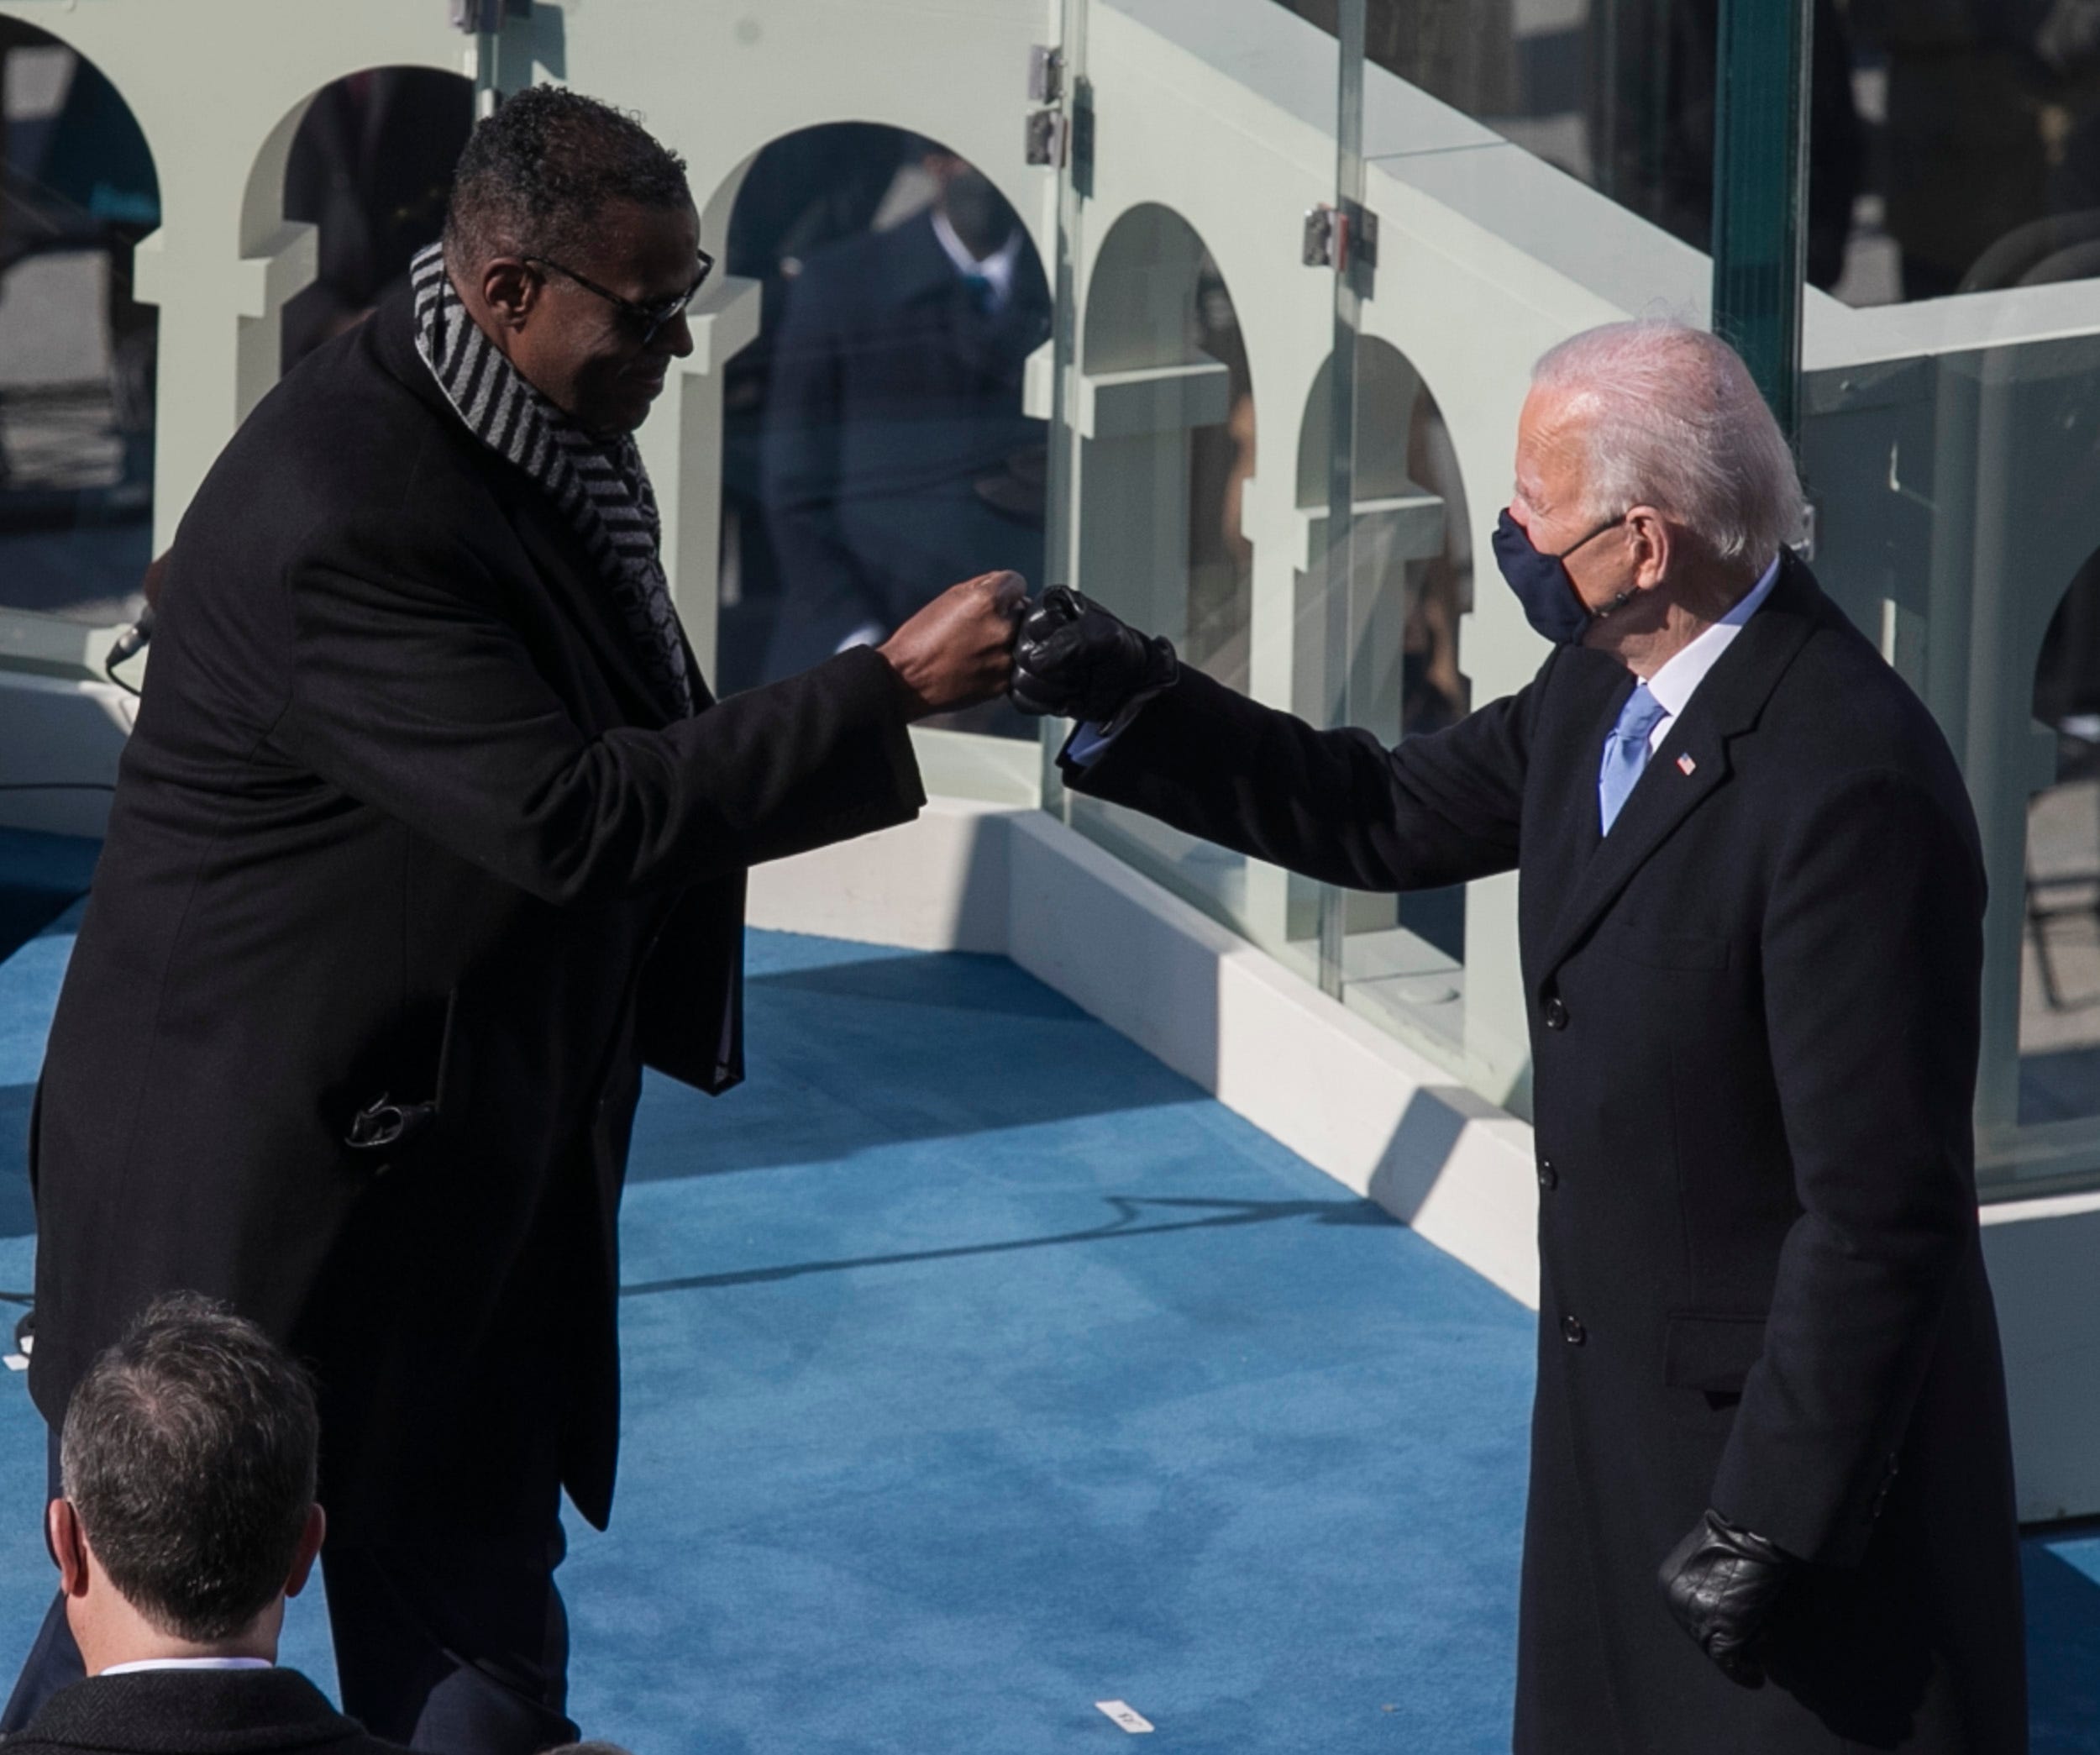 Rev. Silvester Beaman greets President Joe Biden after Beaman delivered the benediction during the 2021 Presidential Inauguration of President Joe Biden and Vice President Kamala Harris at the U.S. Capitol.